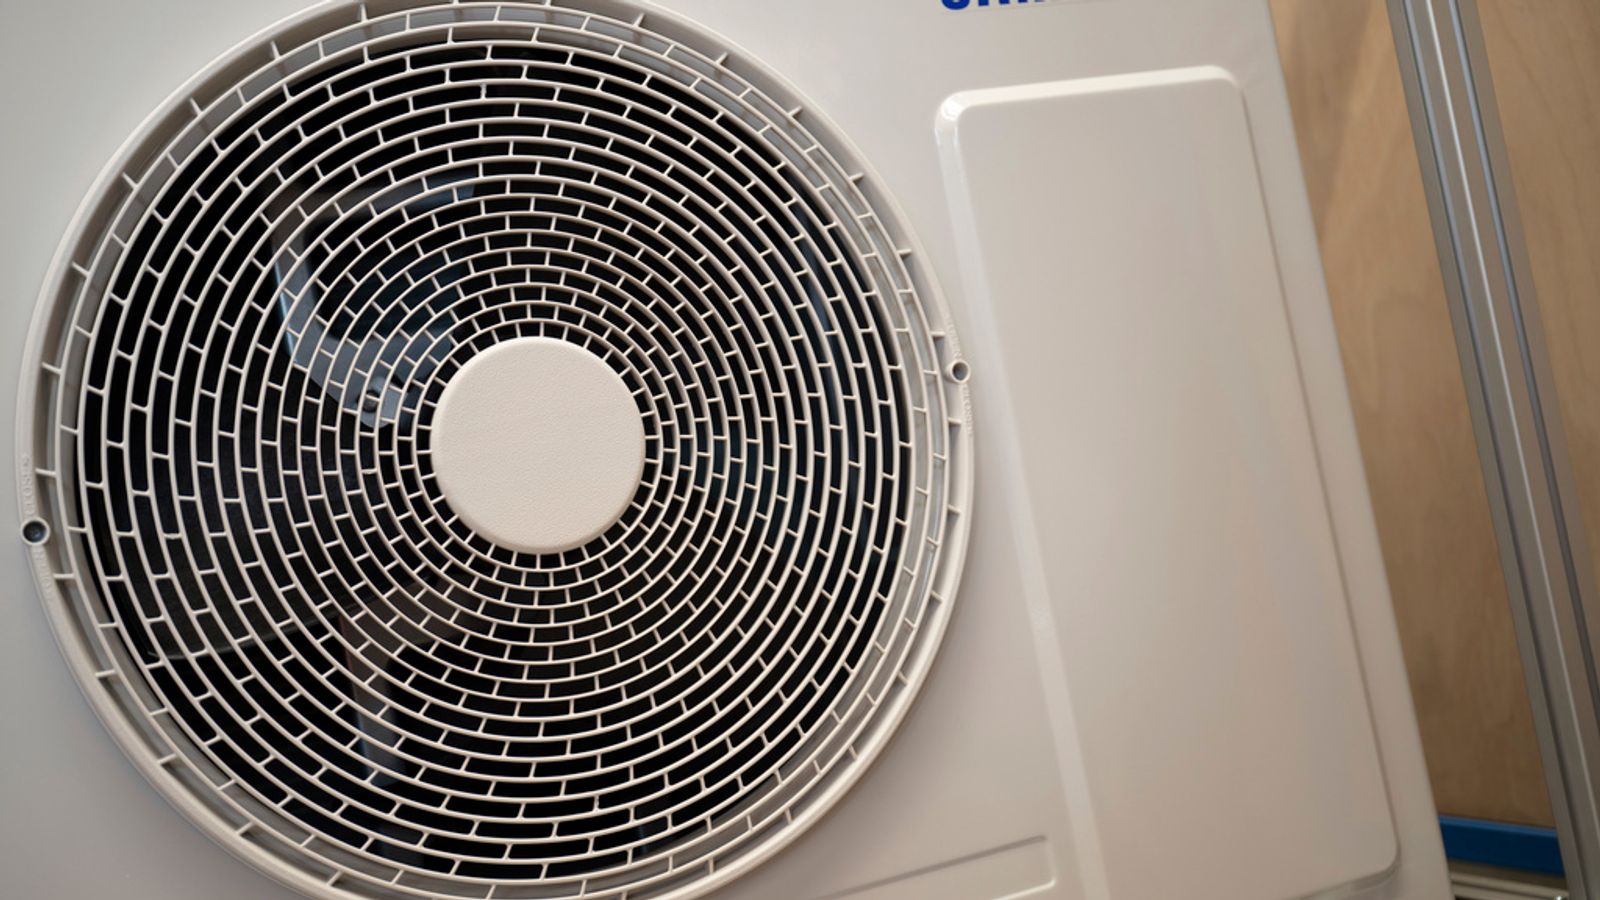 Heat pump policy to proceed as energy secretary bows to ministerial pressure